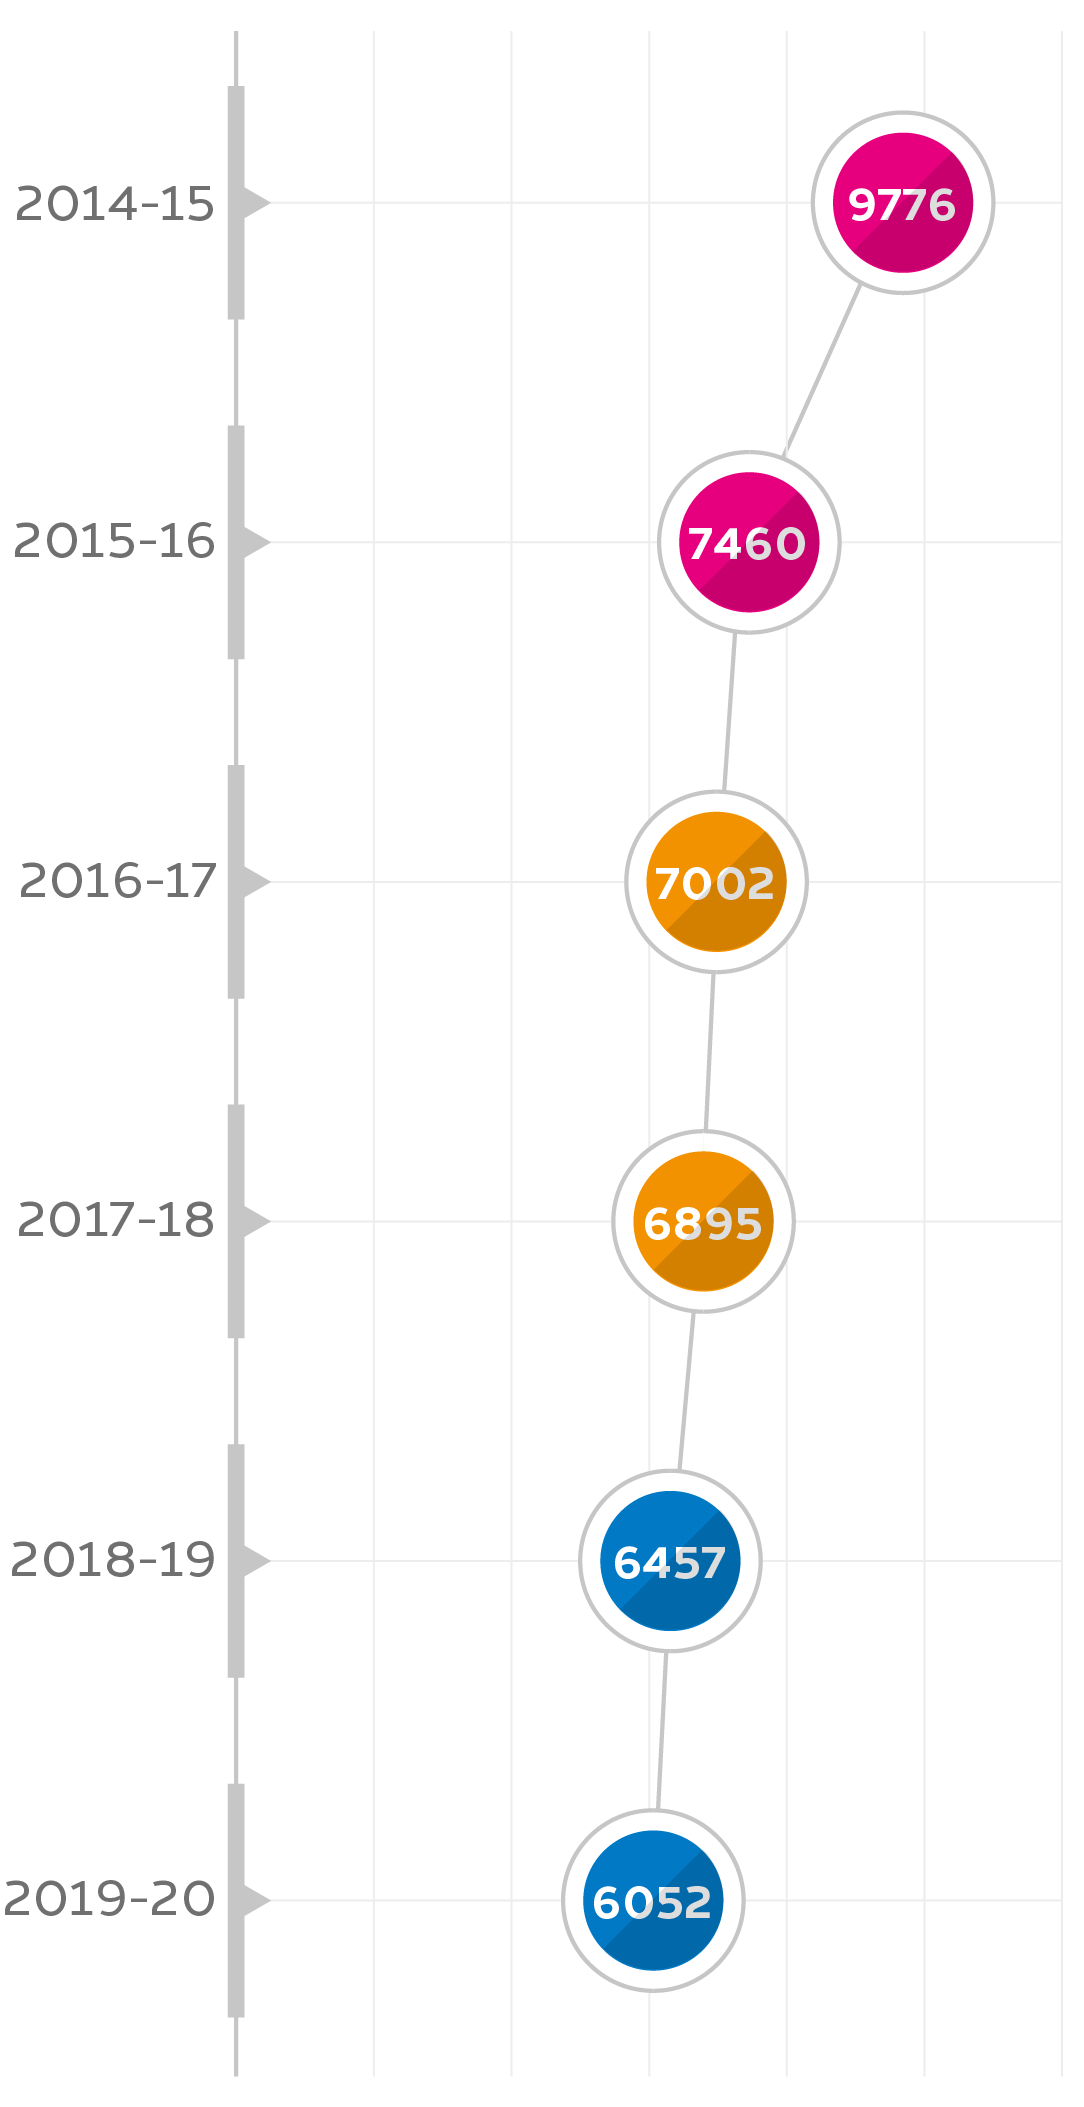 graph of number of resoved tickets per year